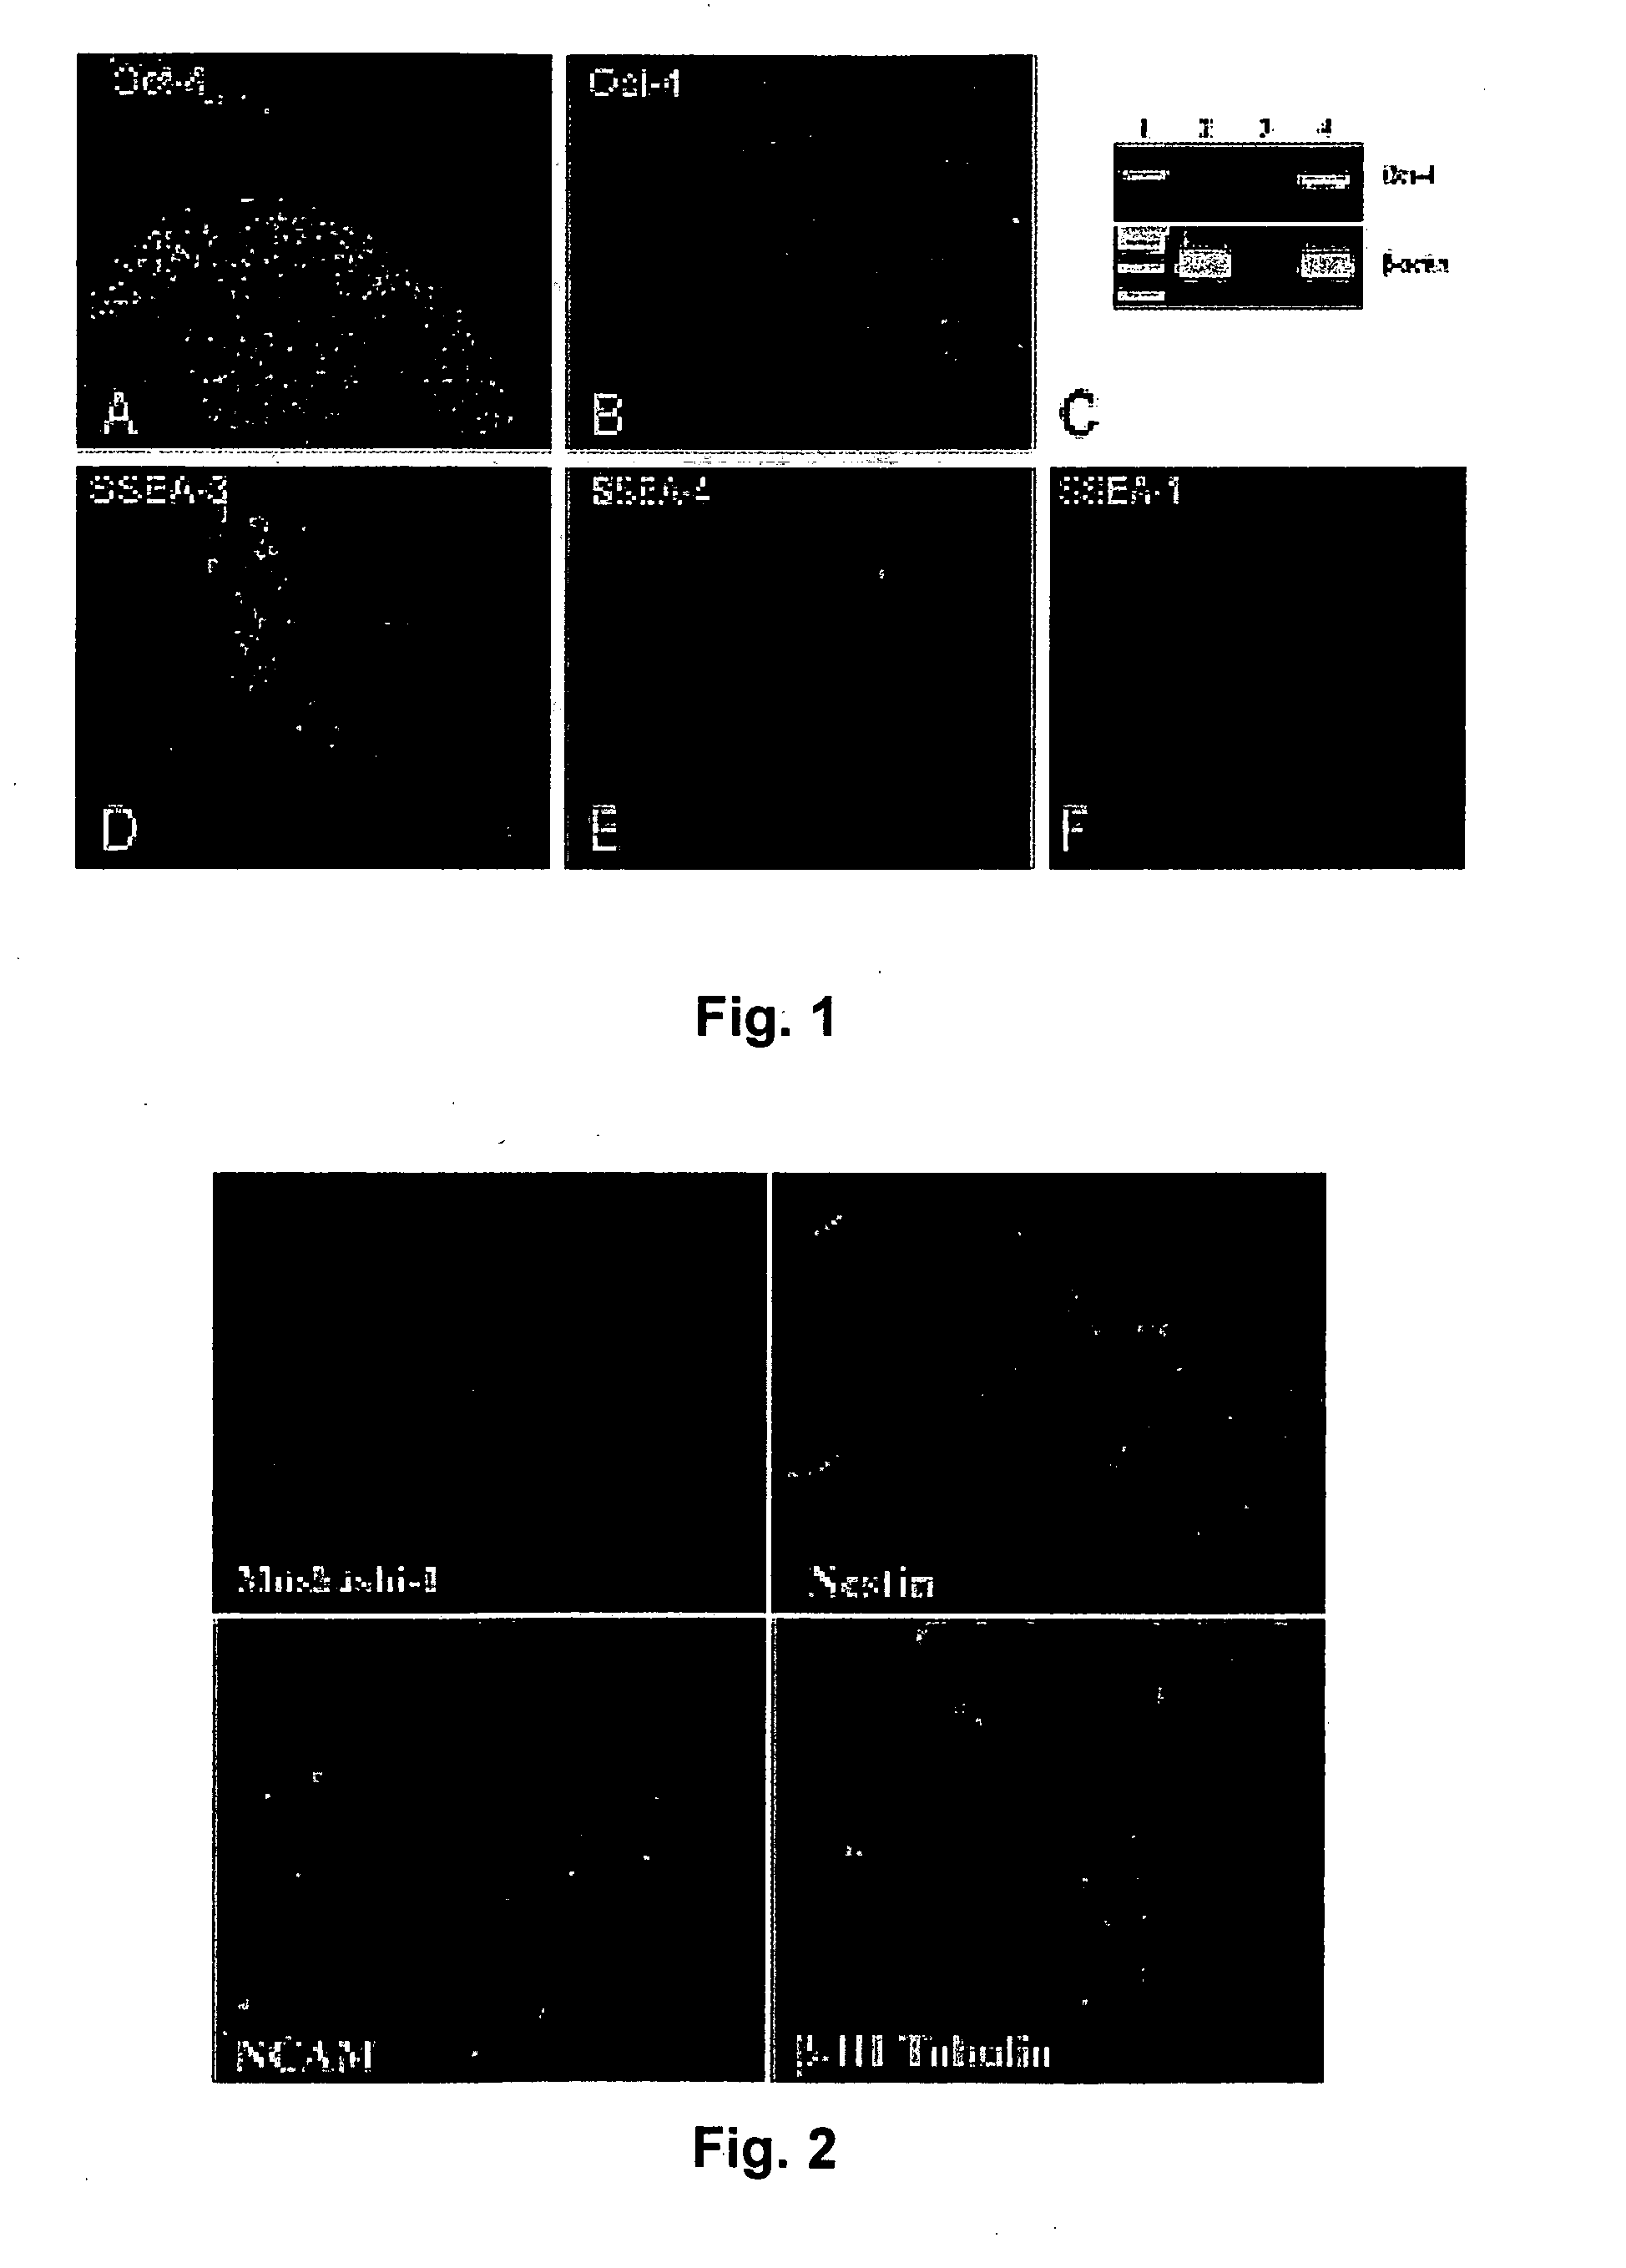 Transplantable cell growth niche and related compositions and methods